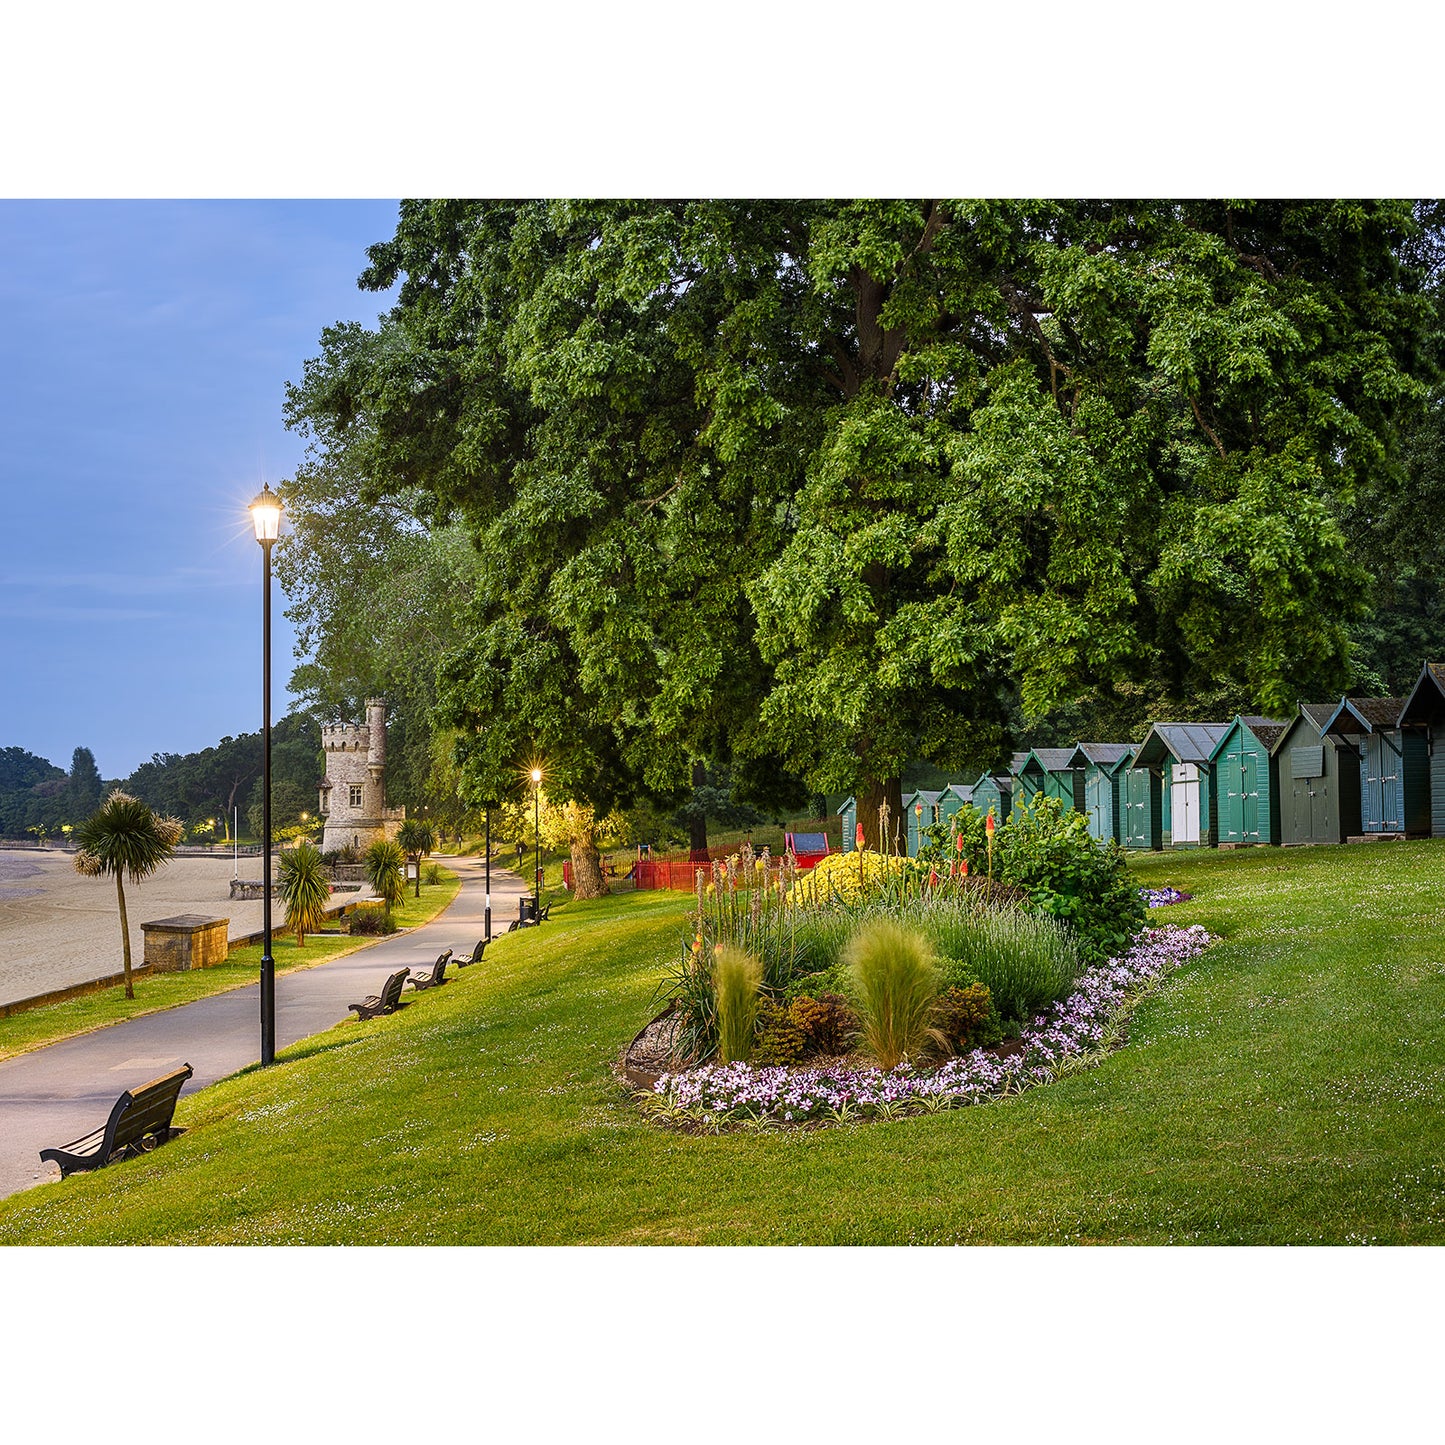 A serene evening in a park with a flowerbed, benches, and colorful beach huts on the Isle of Wight near a sandy area, illuminated by an Appley street lamp from Available Light Photography.